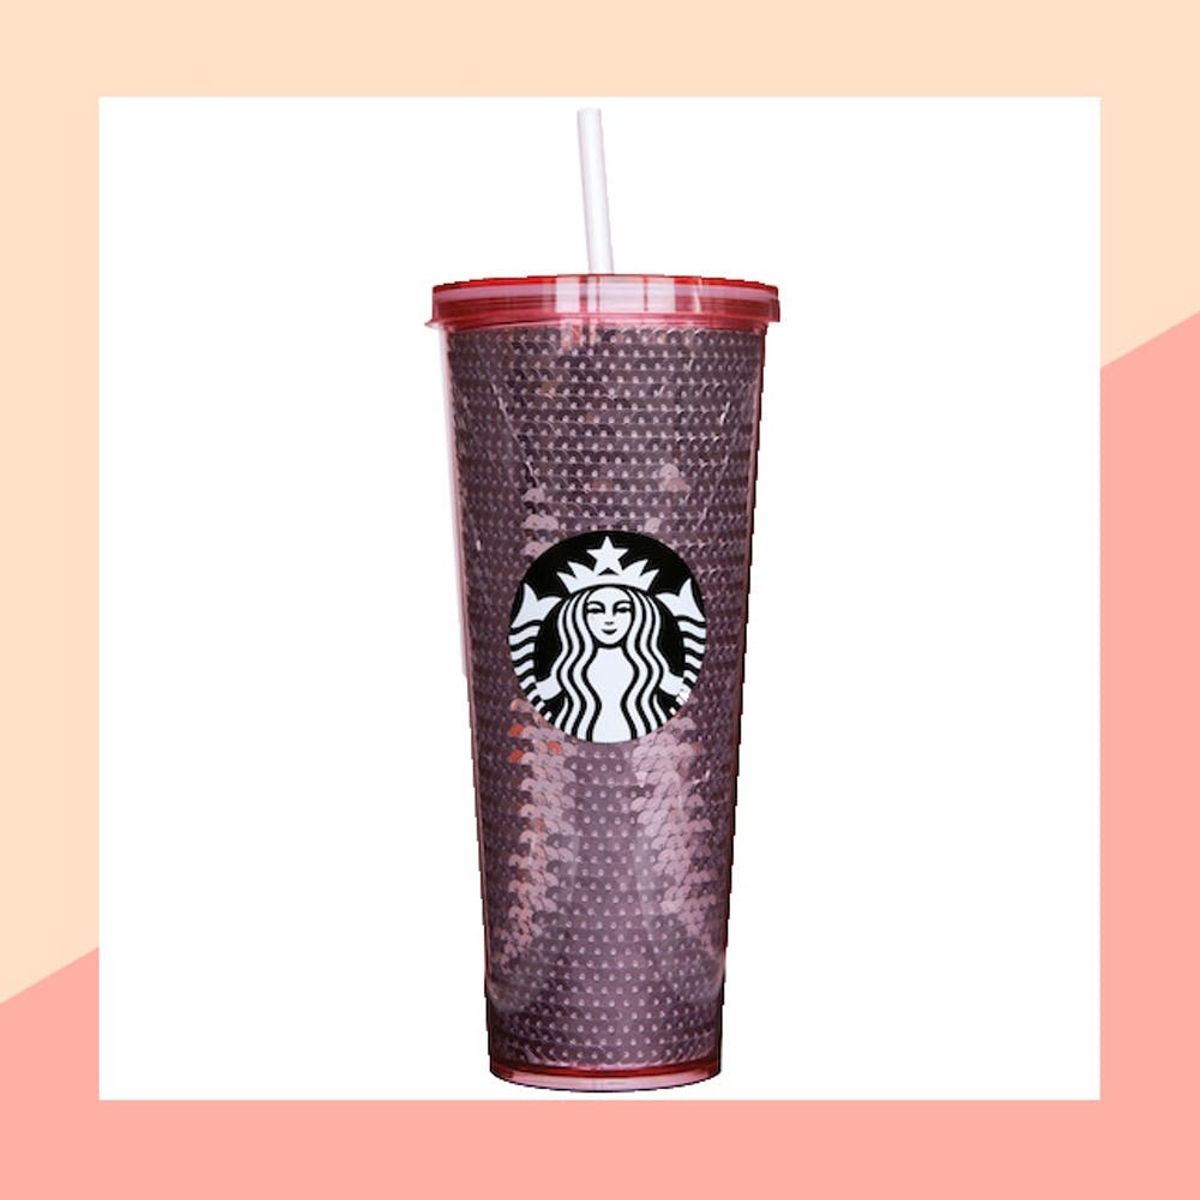 Starbucks Low-Key Launched ROSE GOLD Tumblers and People Are Hunting Them Down